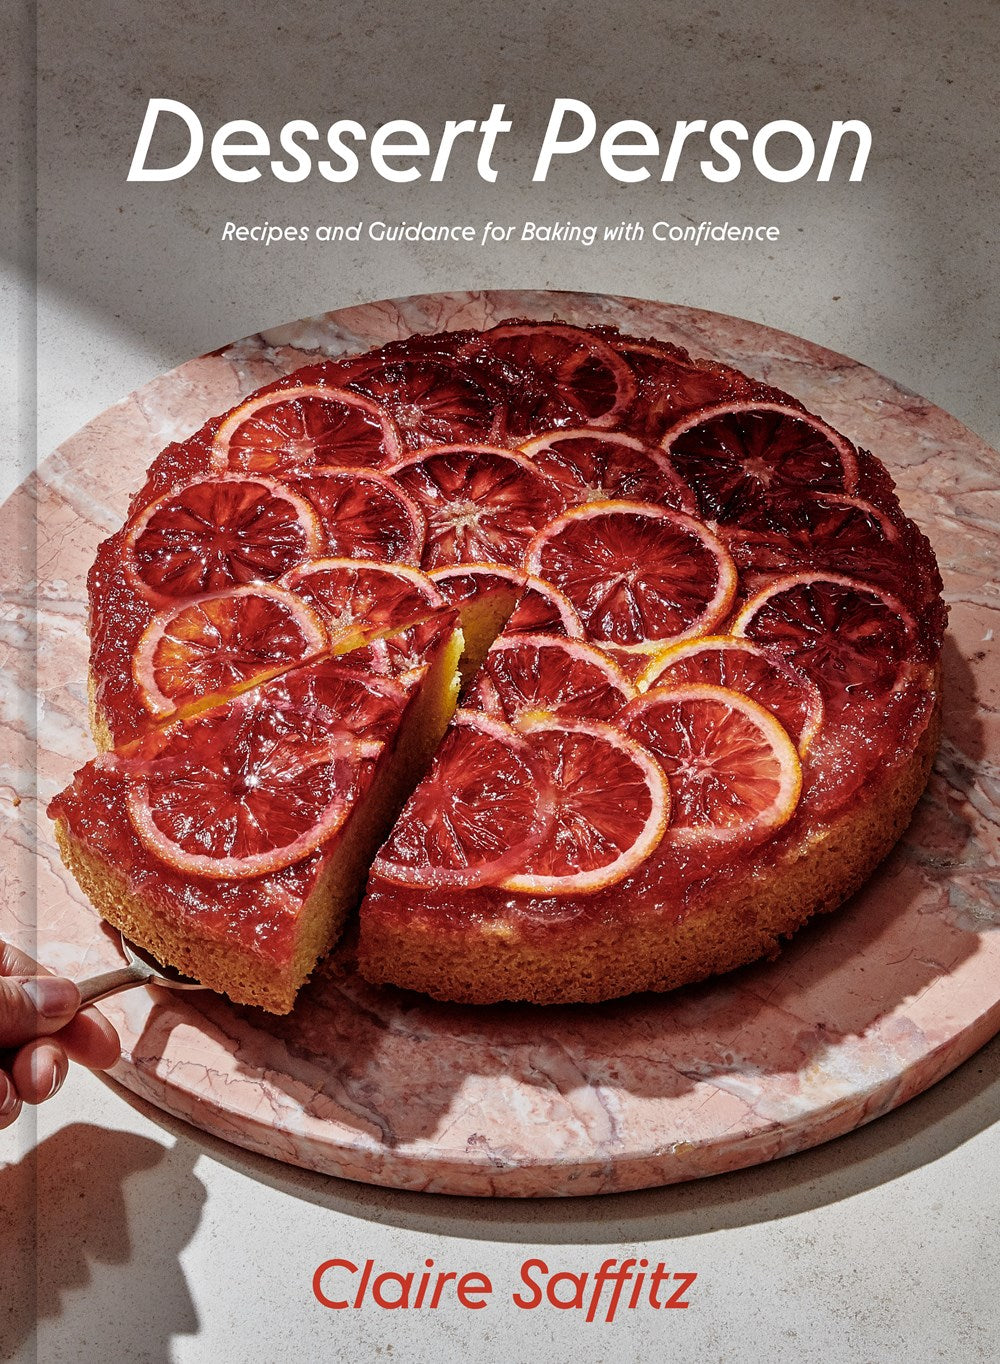 Dessert Person: Recipes and Guidance for Baking with Confidence by Claire Saffitz